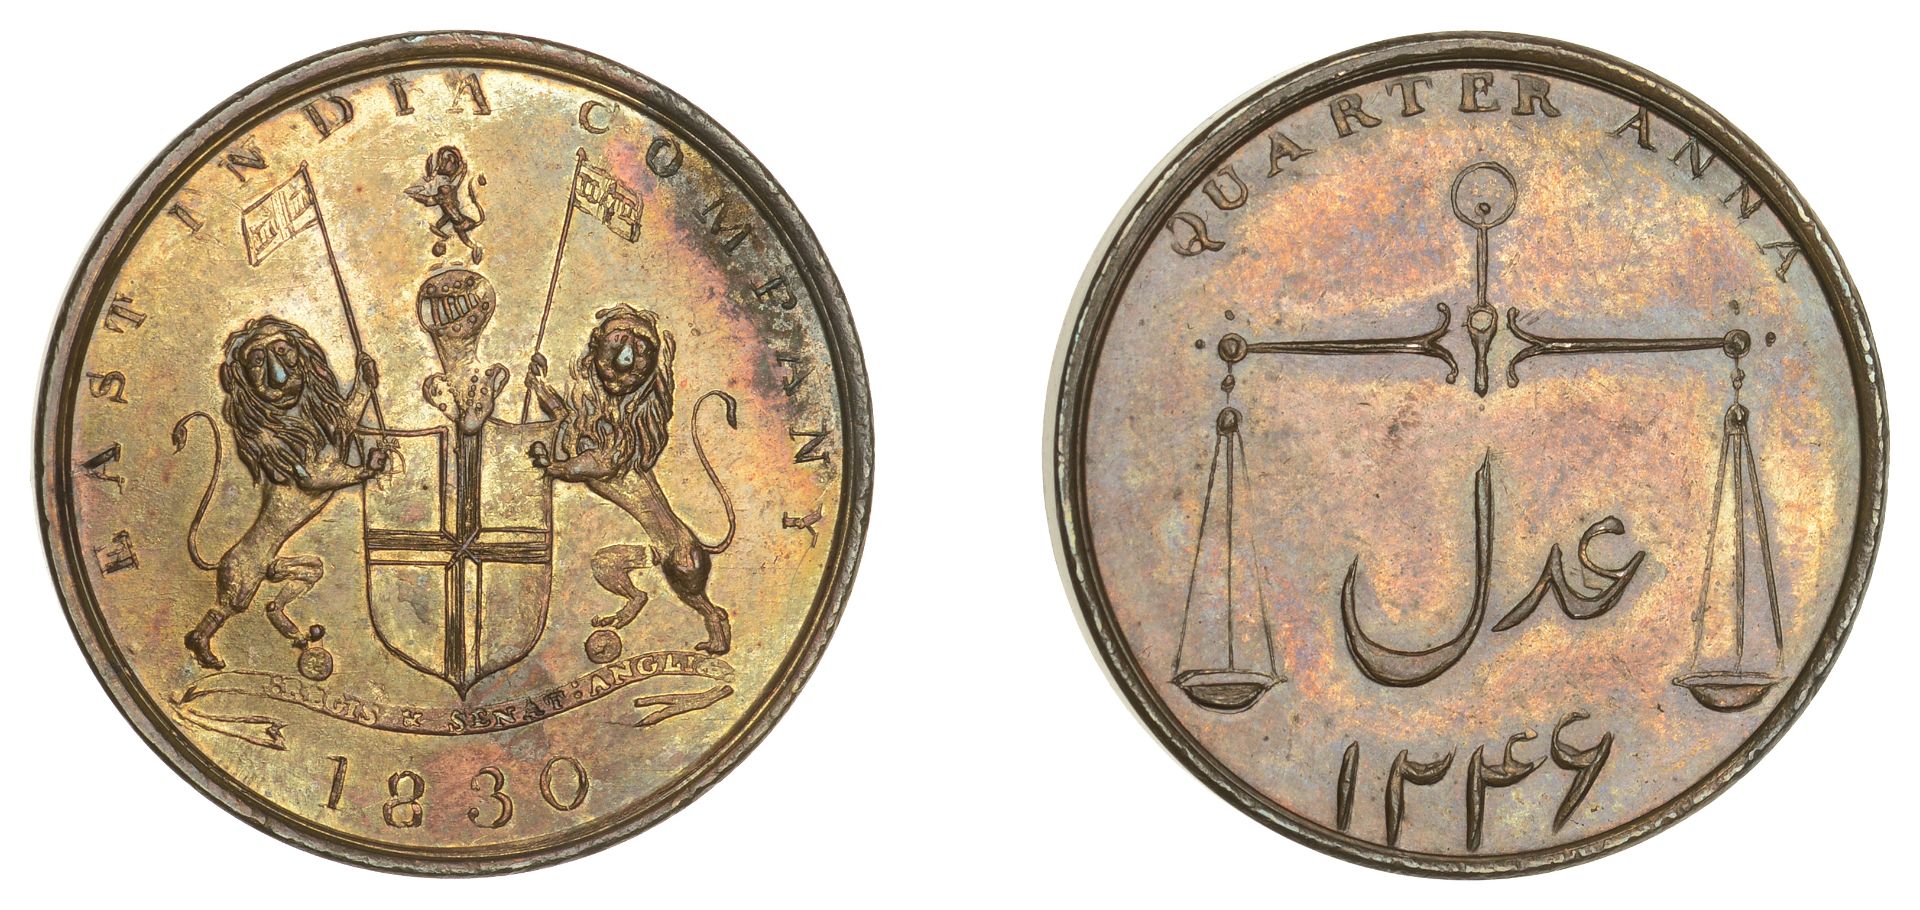 East India Company, Bombay Presidency, Later Uniform coinages, 1830-5, Bombay dies, copper P...